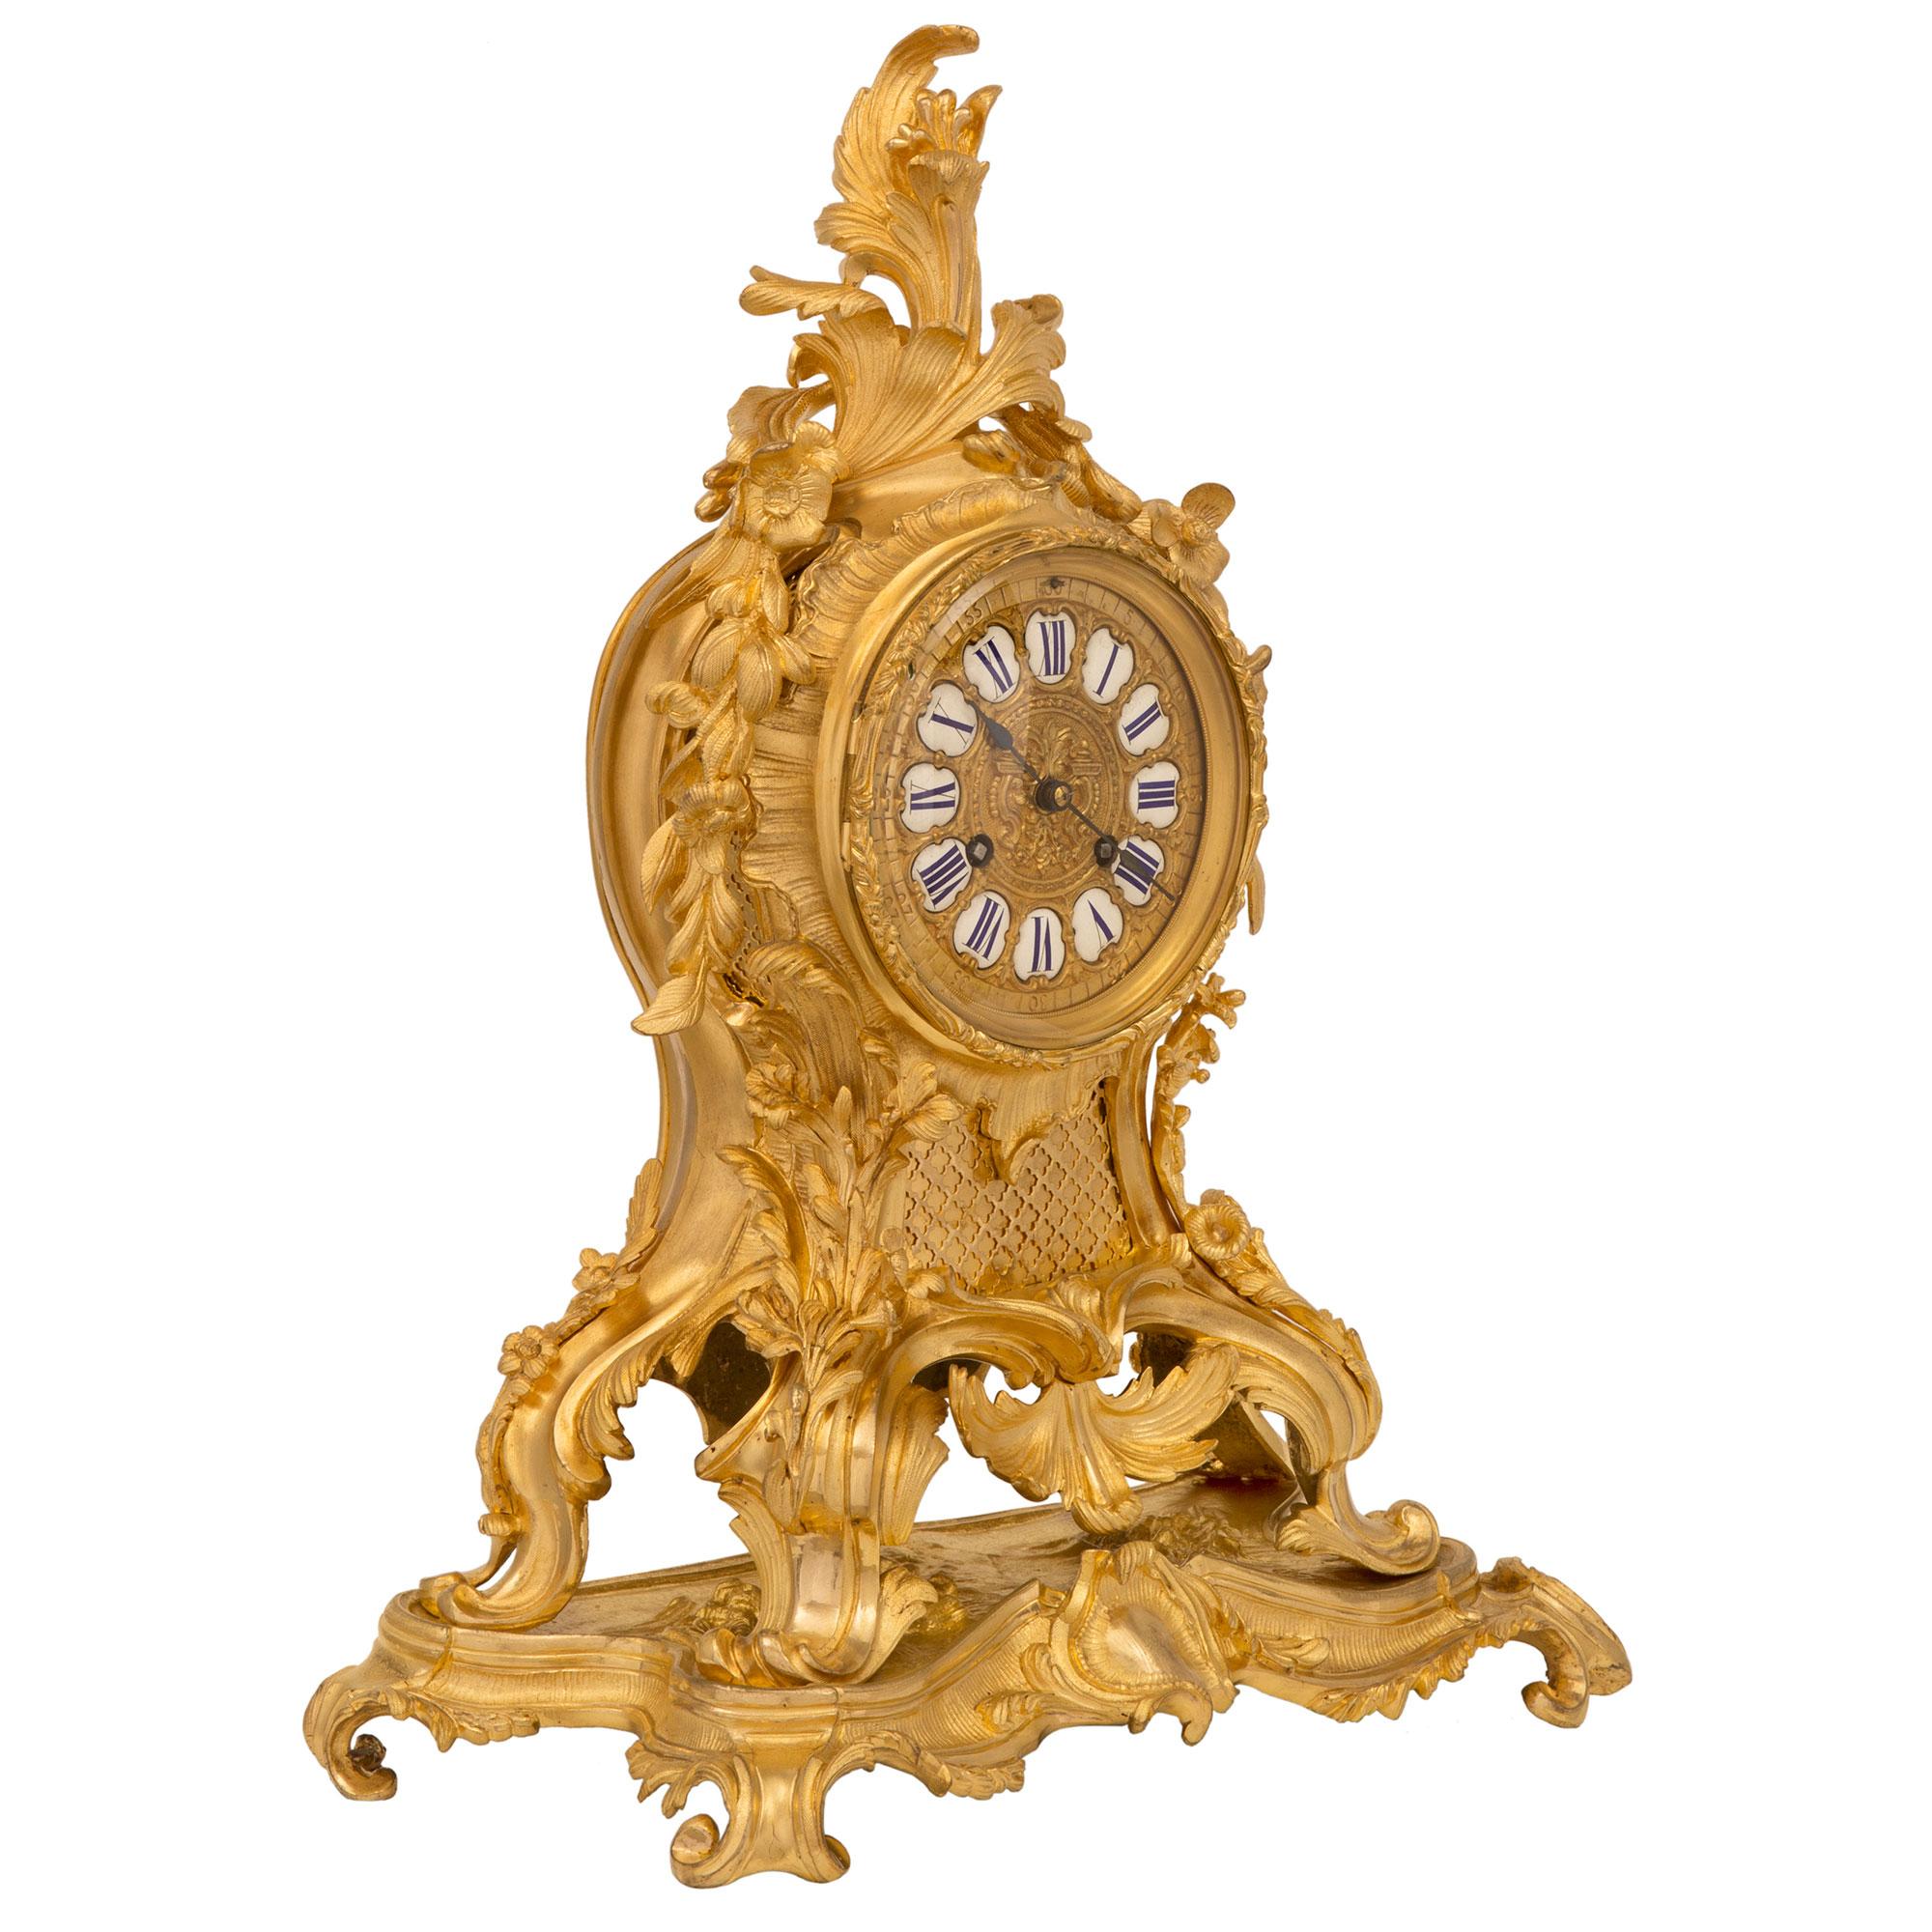 A stunning French mid 19th century Louis XV st. ormolu clock and candelabra garniture set, signed Barrand & Vignon Horlogerie, Paris. The clock is raised by an elegant scrolled Rocaille designed base with a delicate fluted design and a fine central